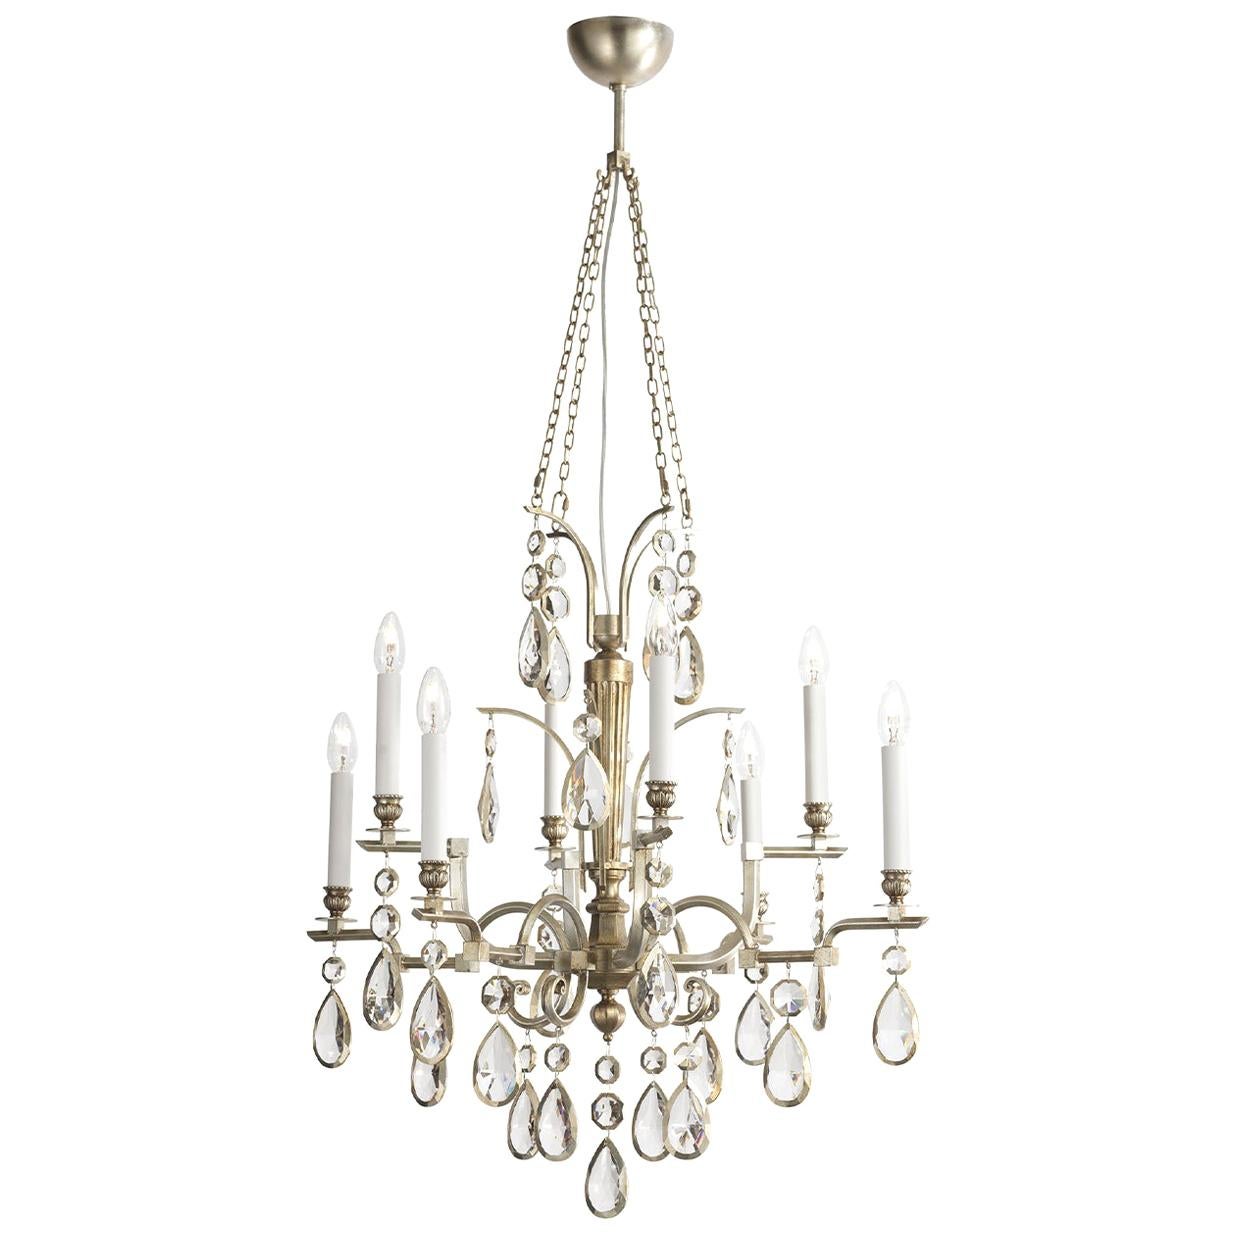 20702 Chandelier For Sale